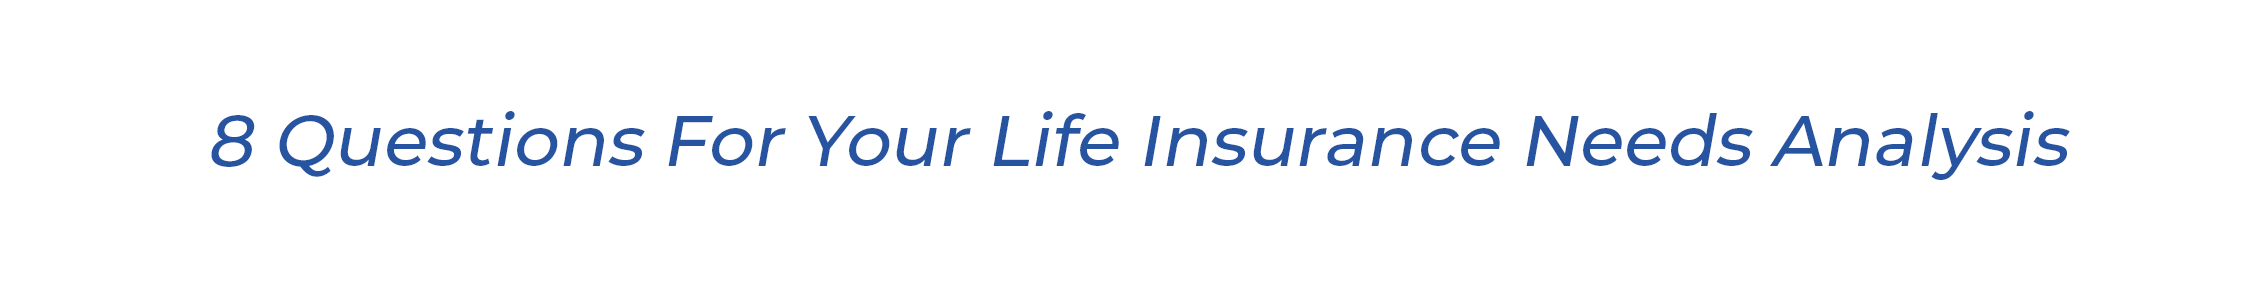 Sept Blog_Text Call Out _8 Questions For Your Life Insurance Needs Analysis.png